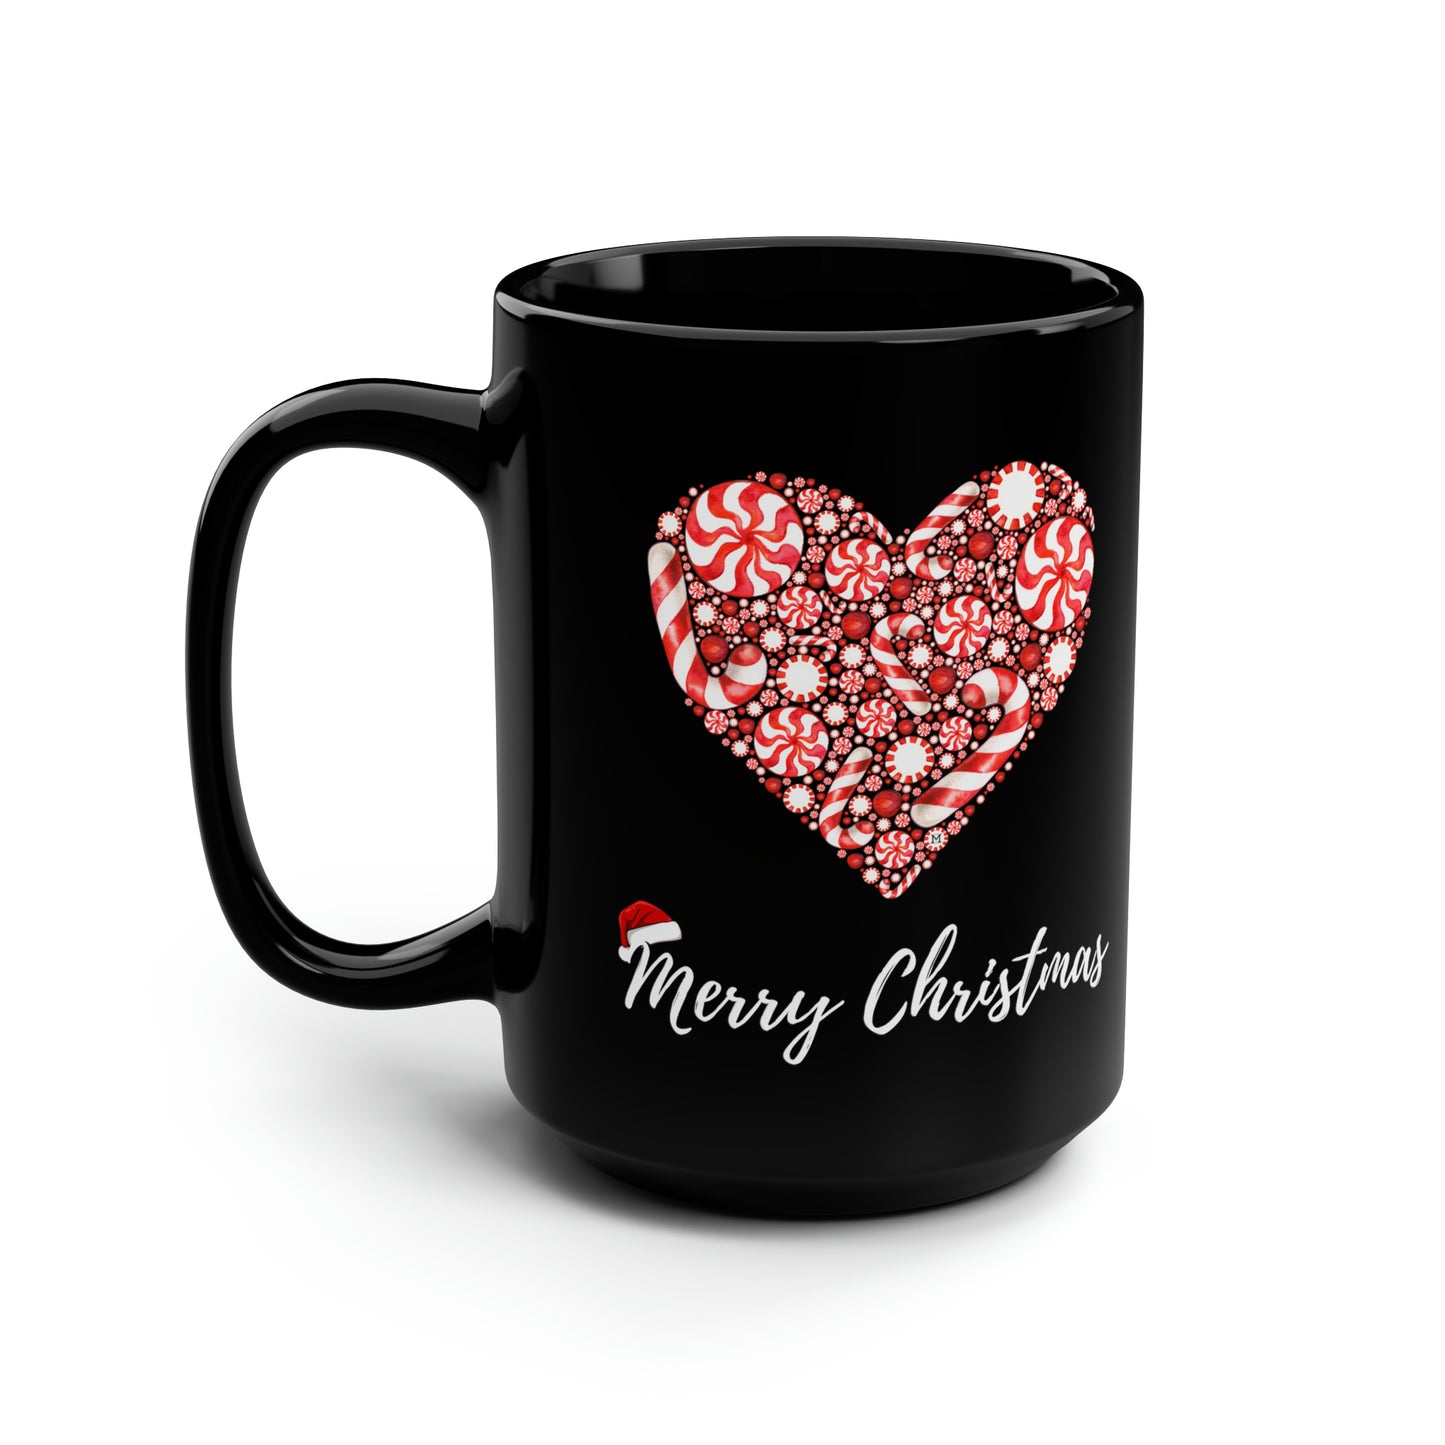 Peppermint Candy Heart Red White with Merry Christmas and Santa Hat on Black Mug, 15oz